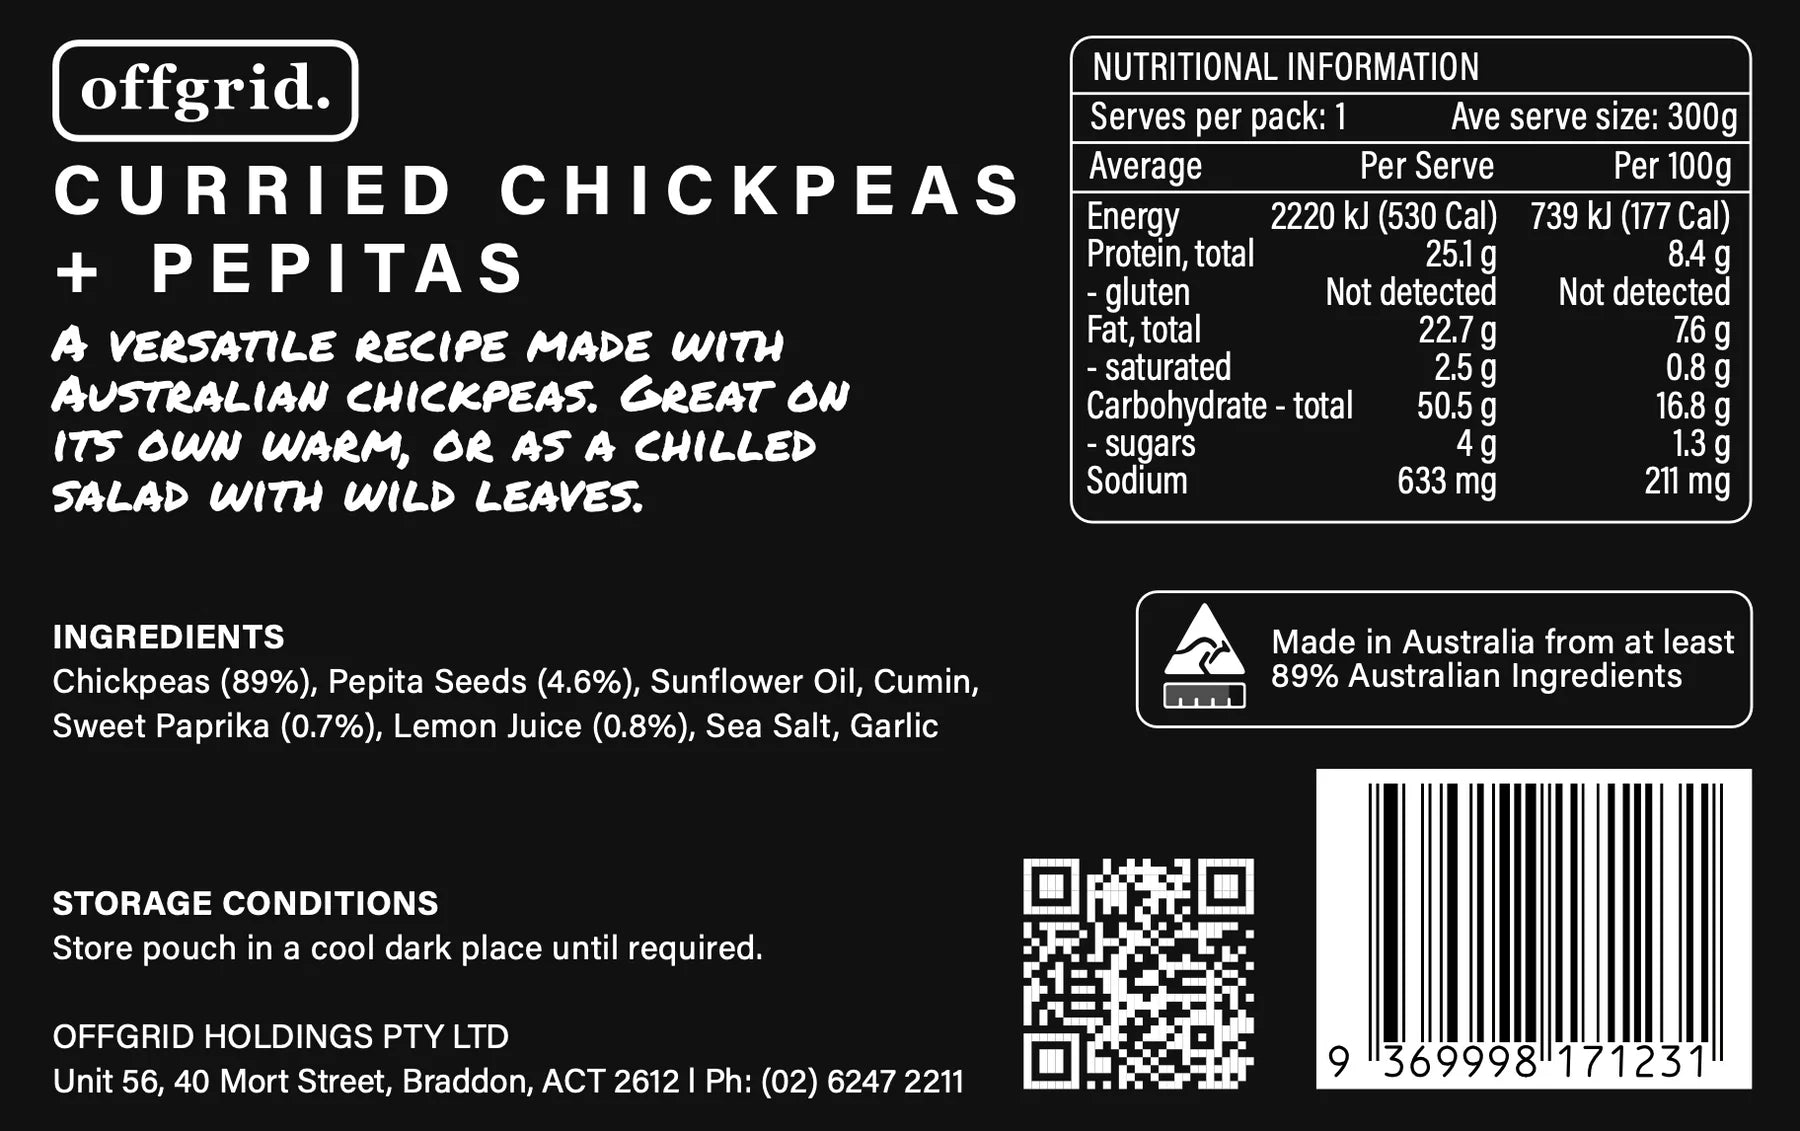 Offgrid Provisions Curried Chickpeas & Pepitas - 300g -  - Mansfield Hunting & Fishing - Products to prepare for Corona Virus